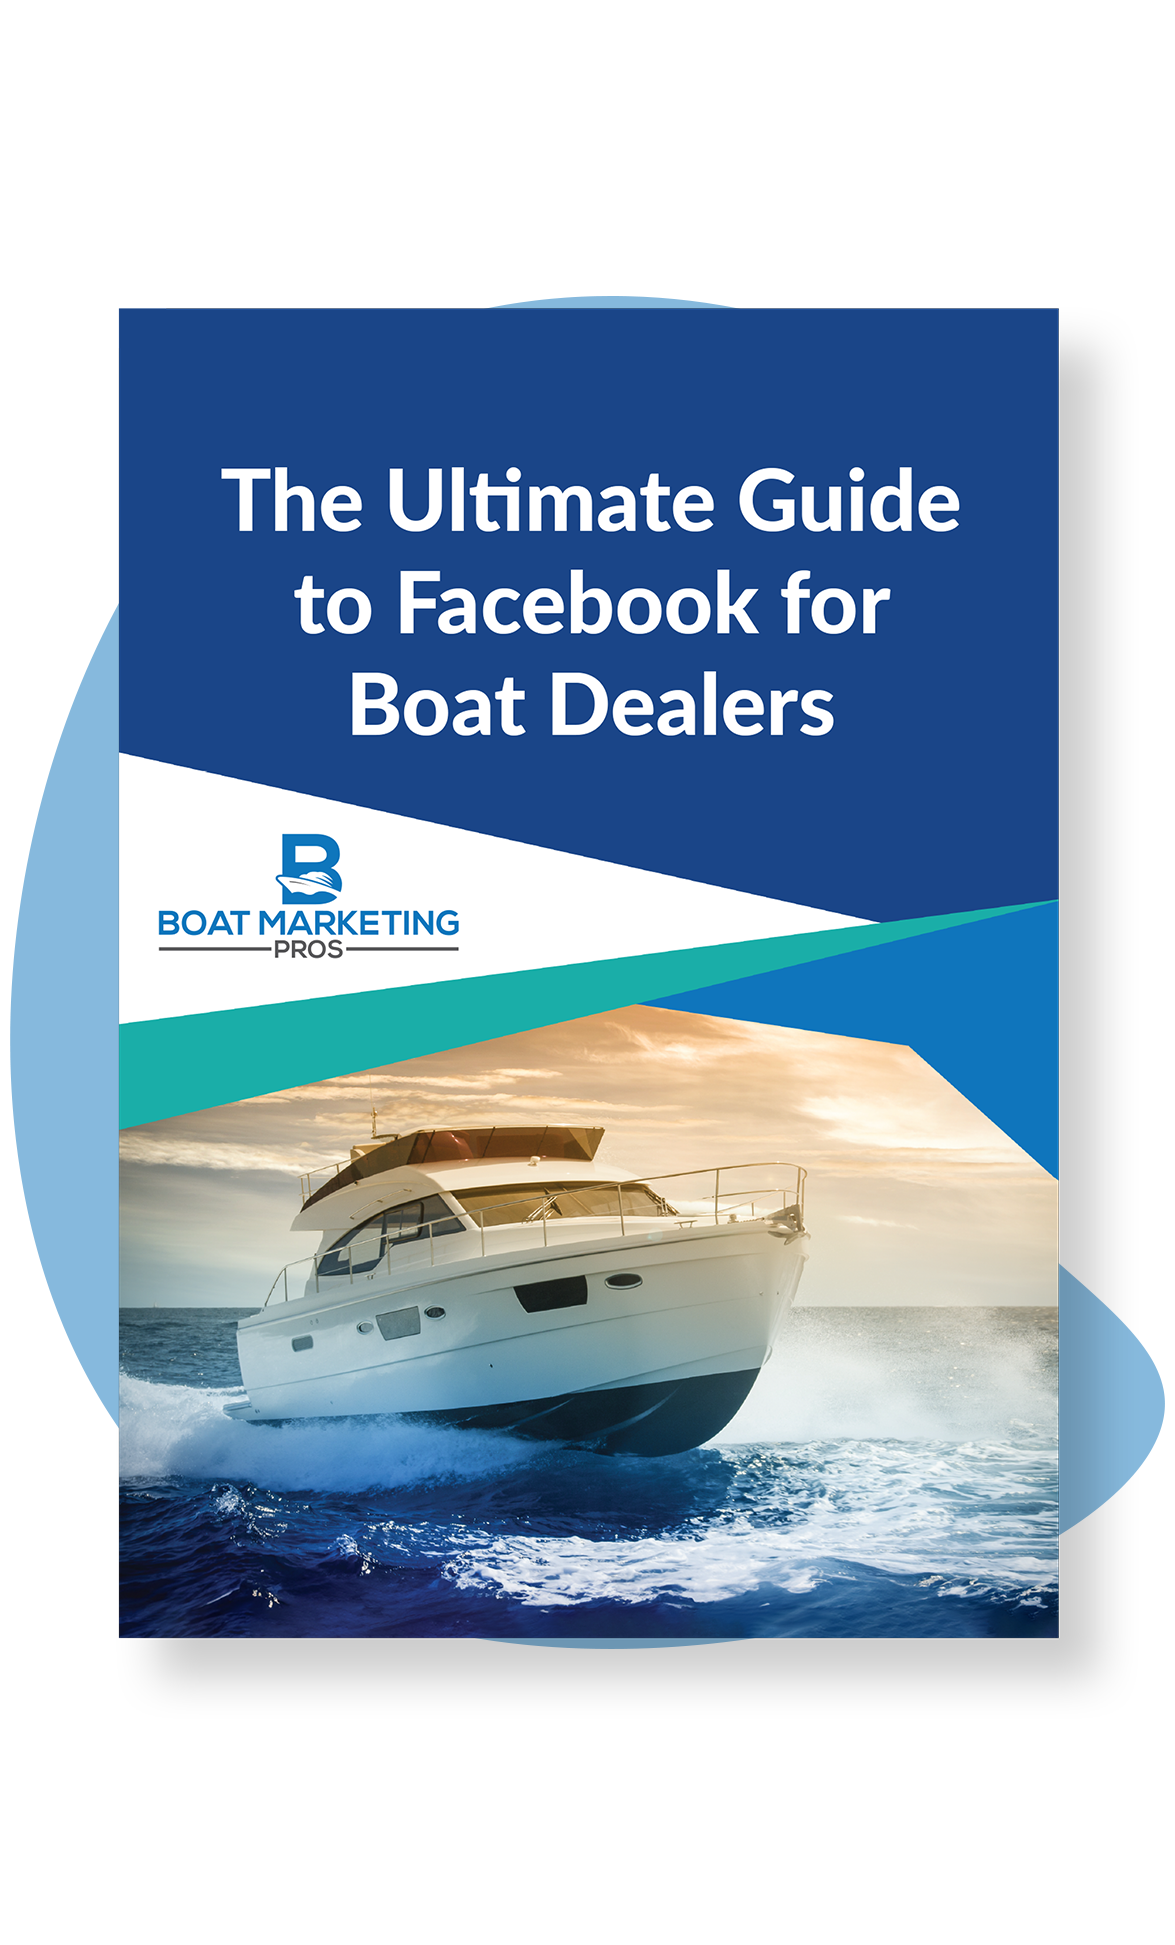 The Ultimate Guide to Facebook for Boat Dealers